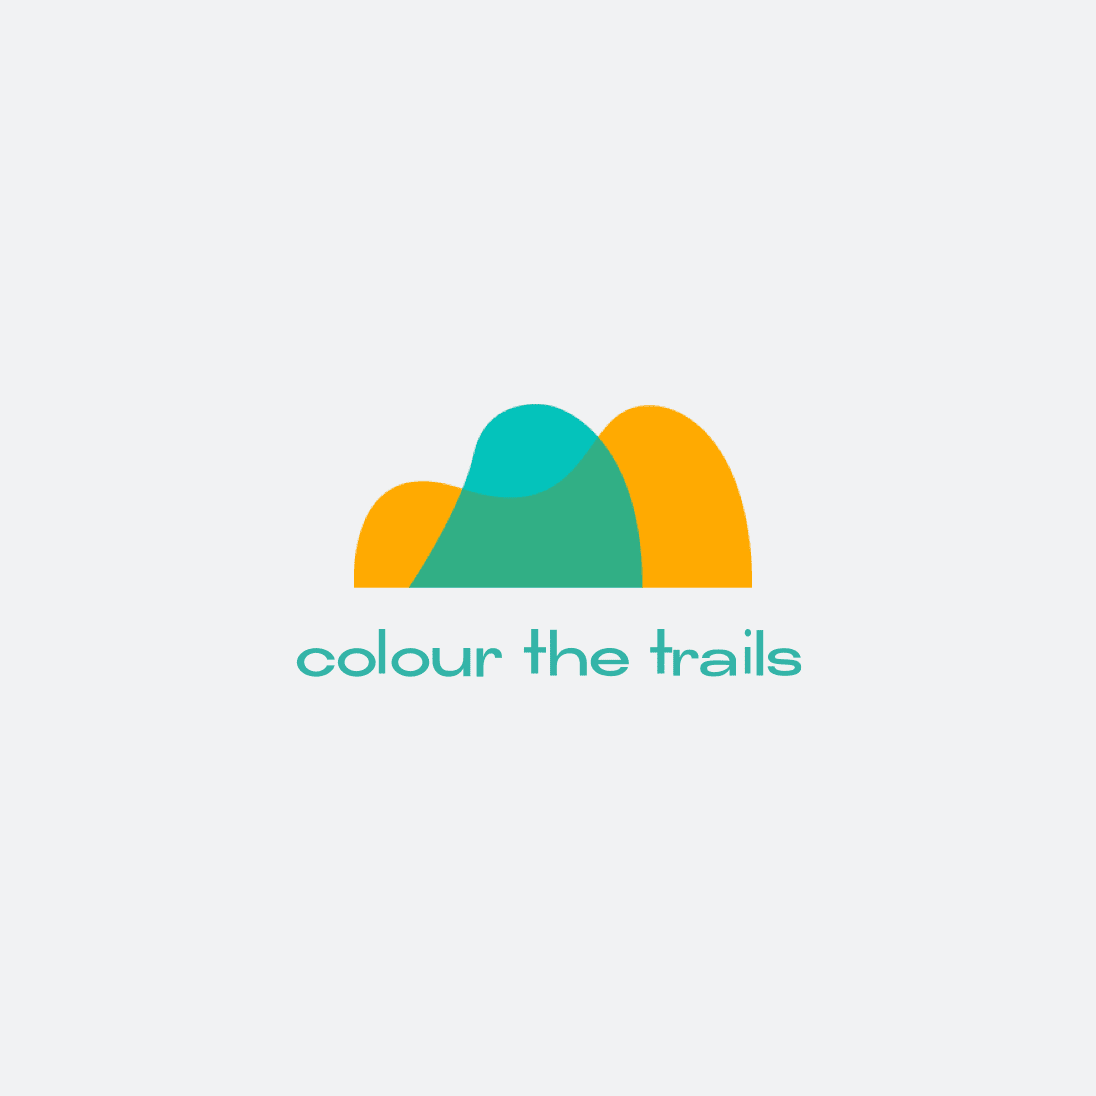 Colour the Trails logo on a gray background.